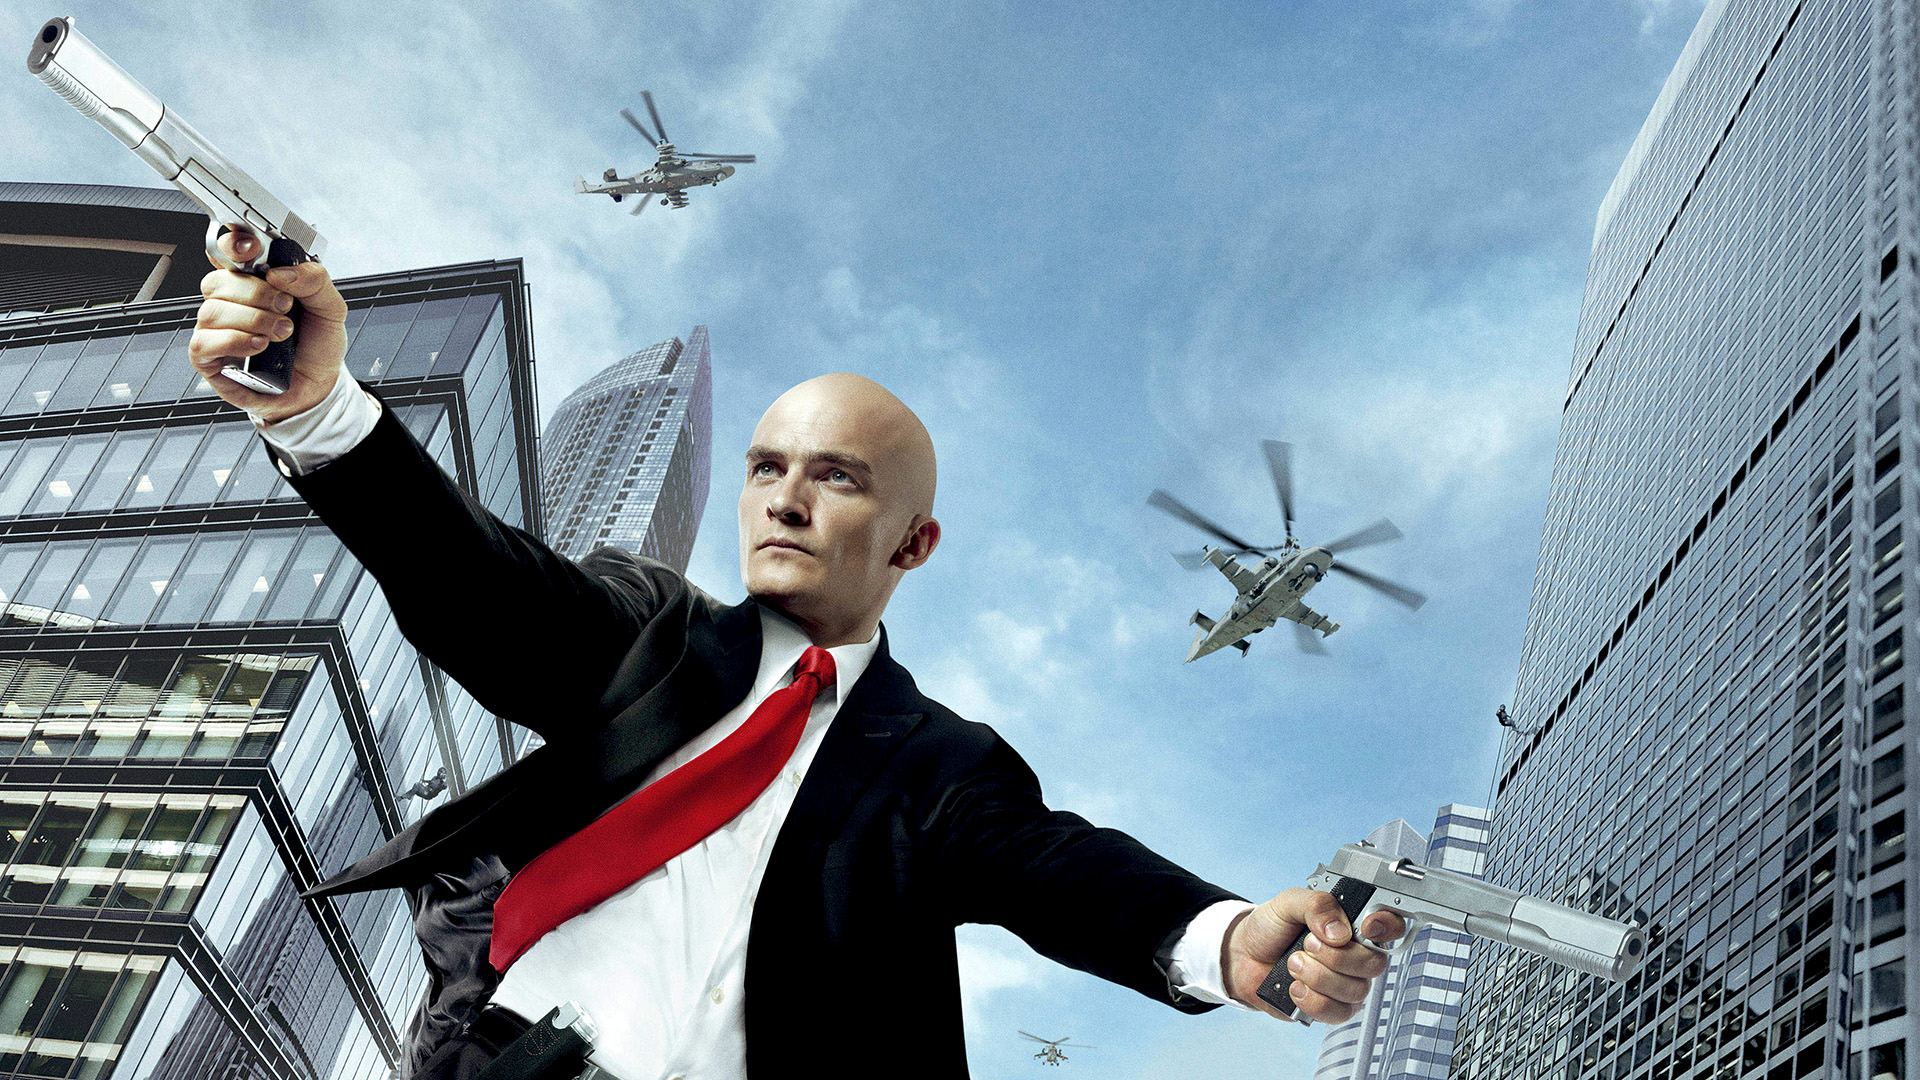 Hitman: Agent 47 Backgrounds, Pictures, Images